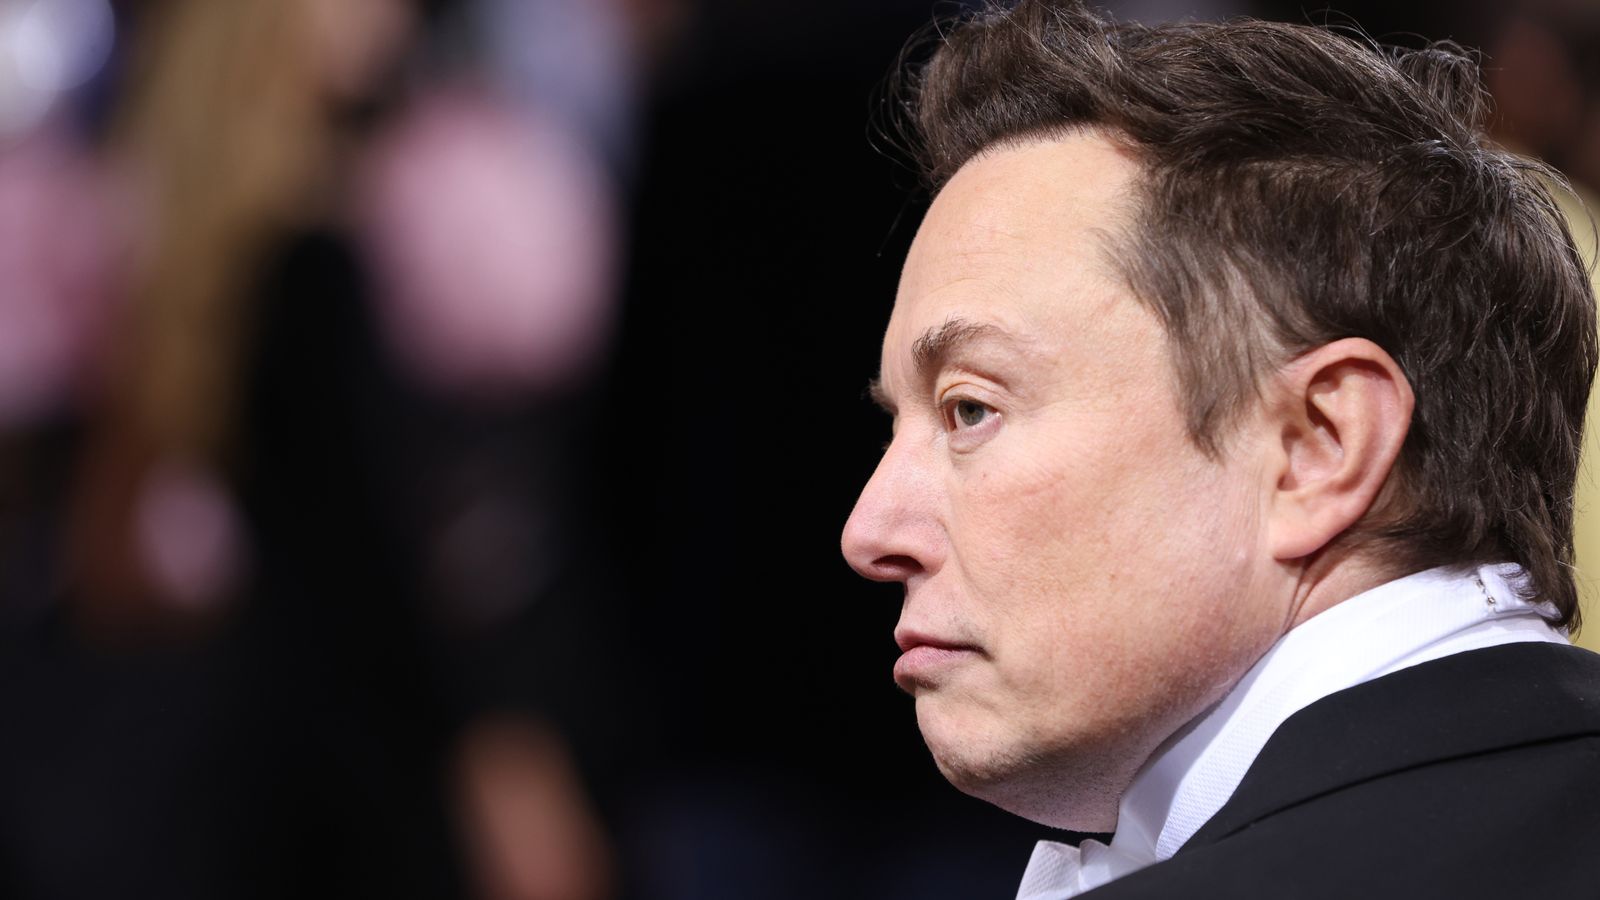 Elon Musk apologises after mocking sacked Twitter worker in online row